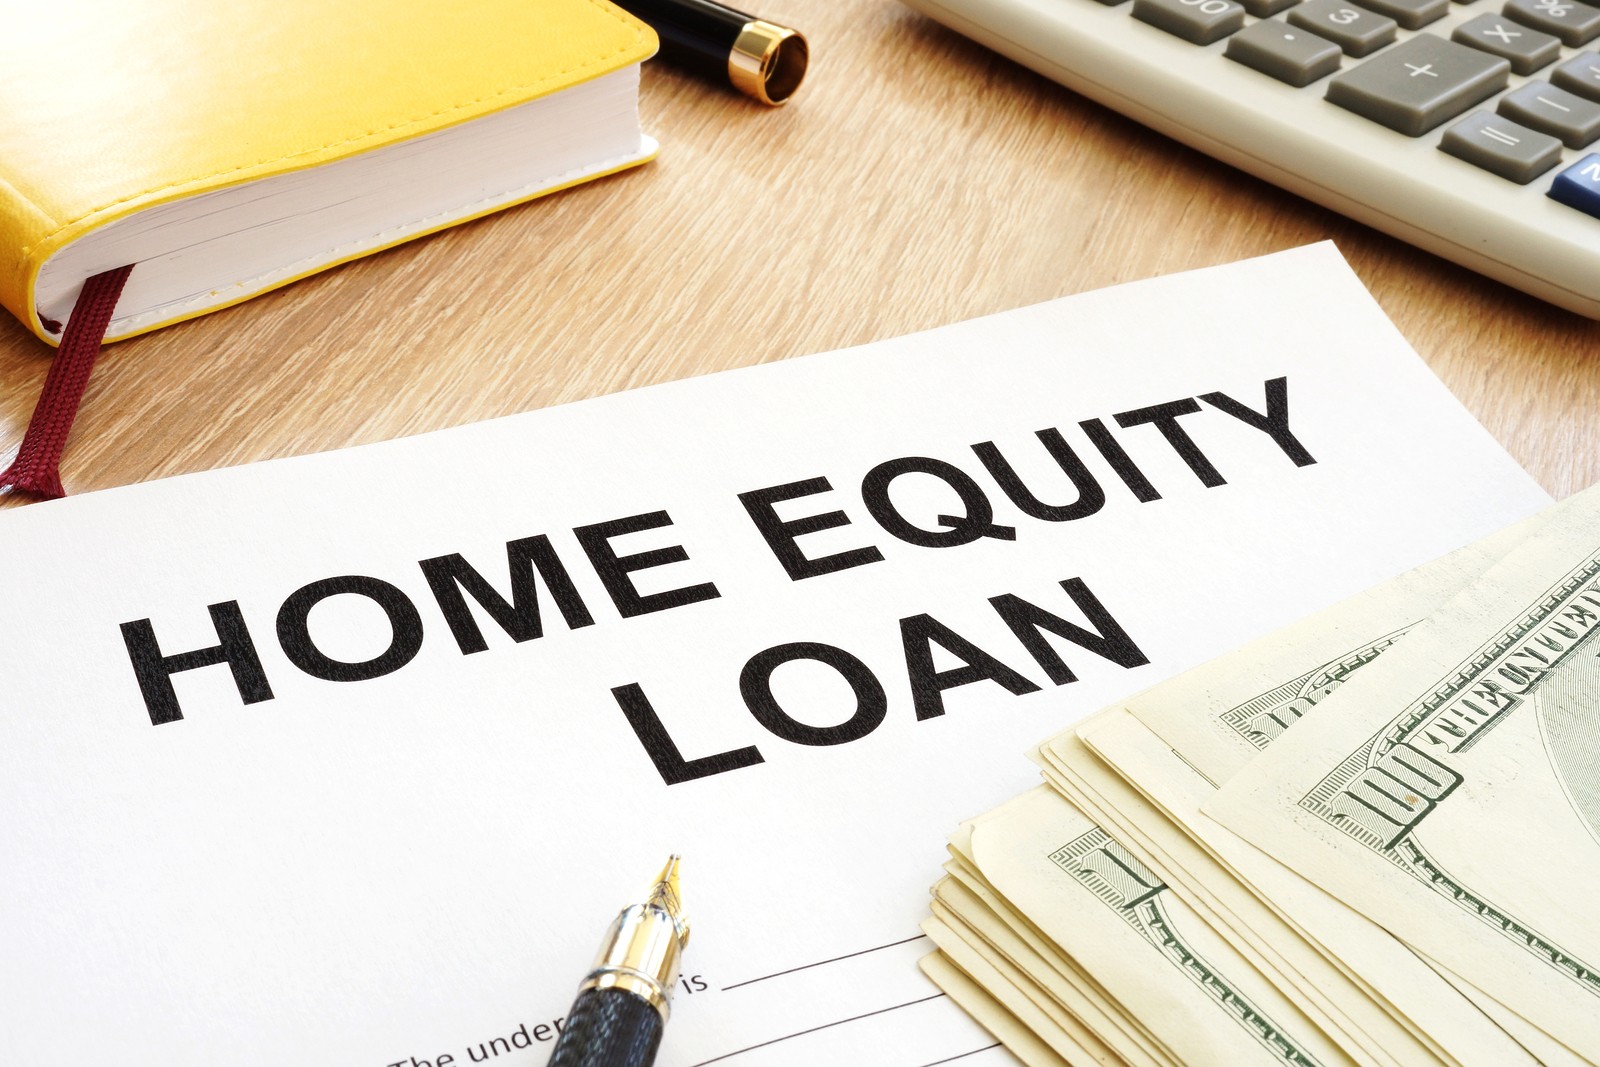 Things to Think About When Applying for a Home Equity Line of Credit